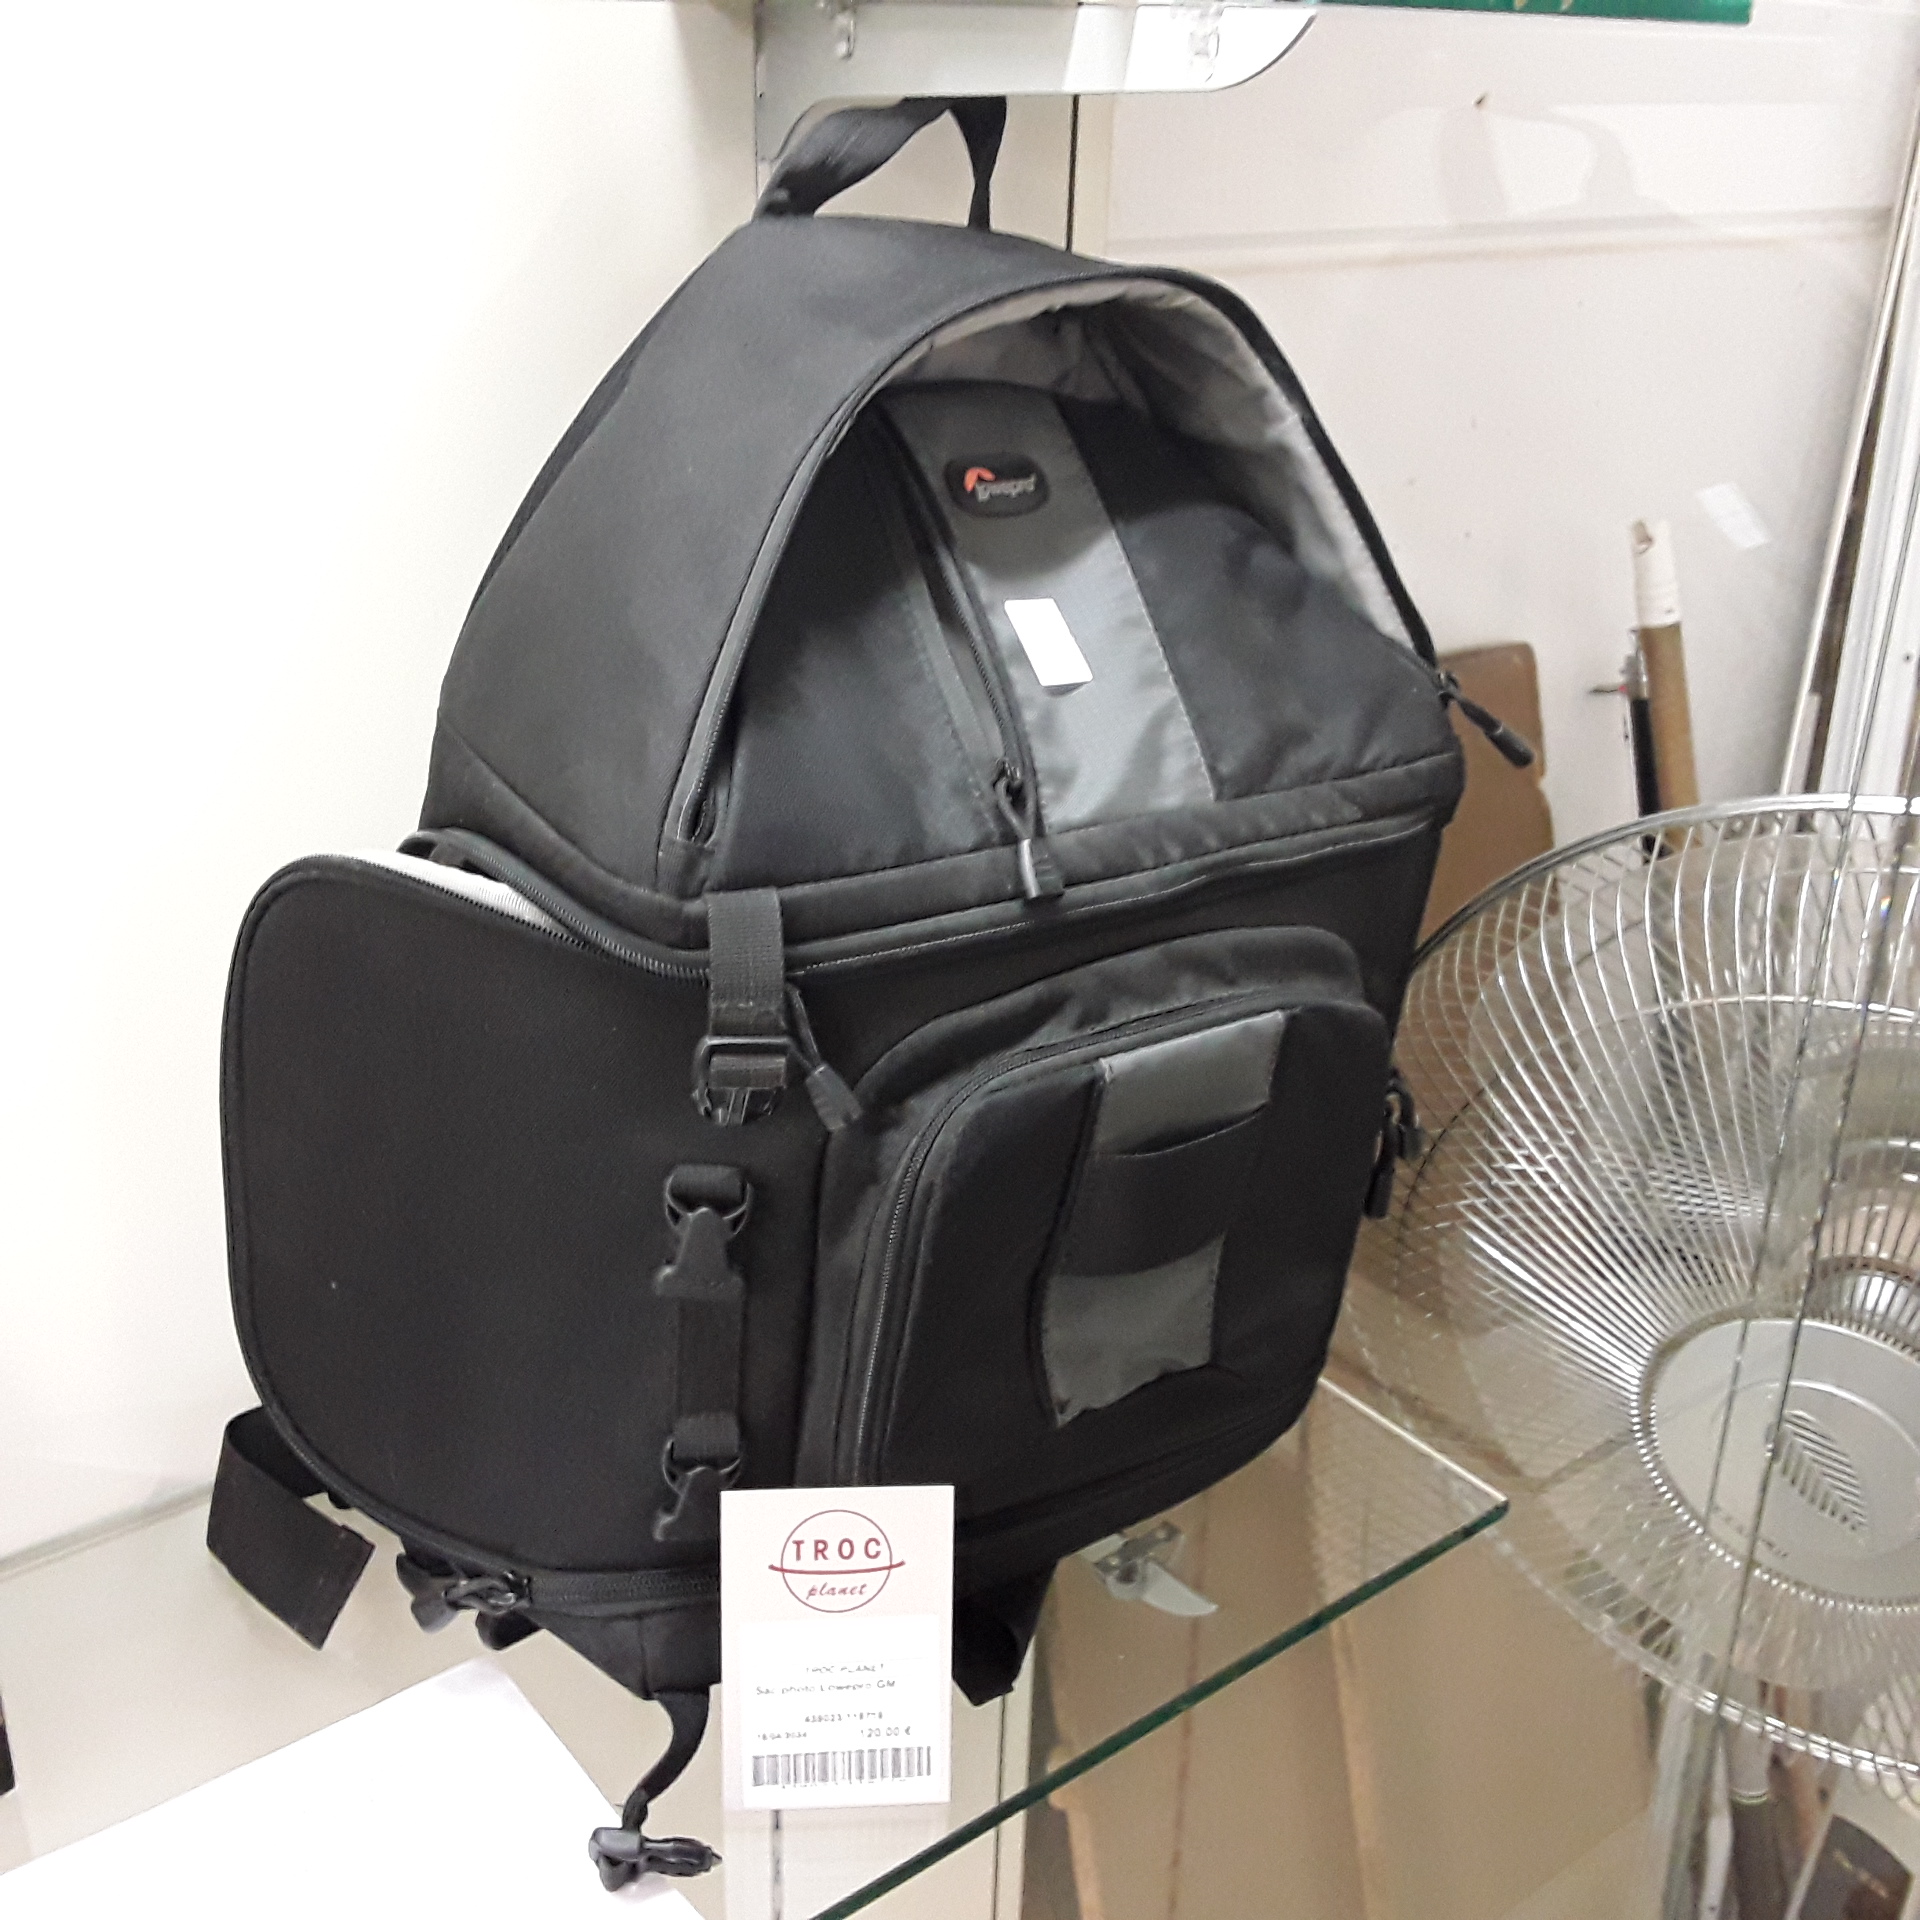 <p>Sac photo Lowepro GM<br />120,00 € T.T.C<br /><a href="/Article/118719?type=depose" style="color:white;" target="_blank">Lien vers l&#39;article</a></p>